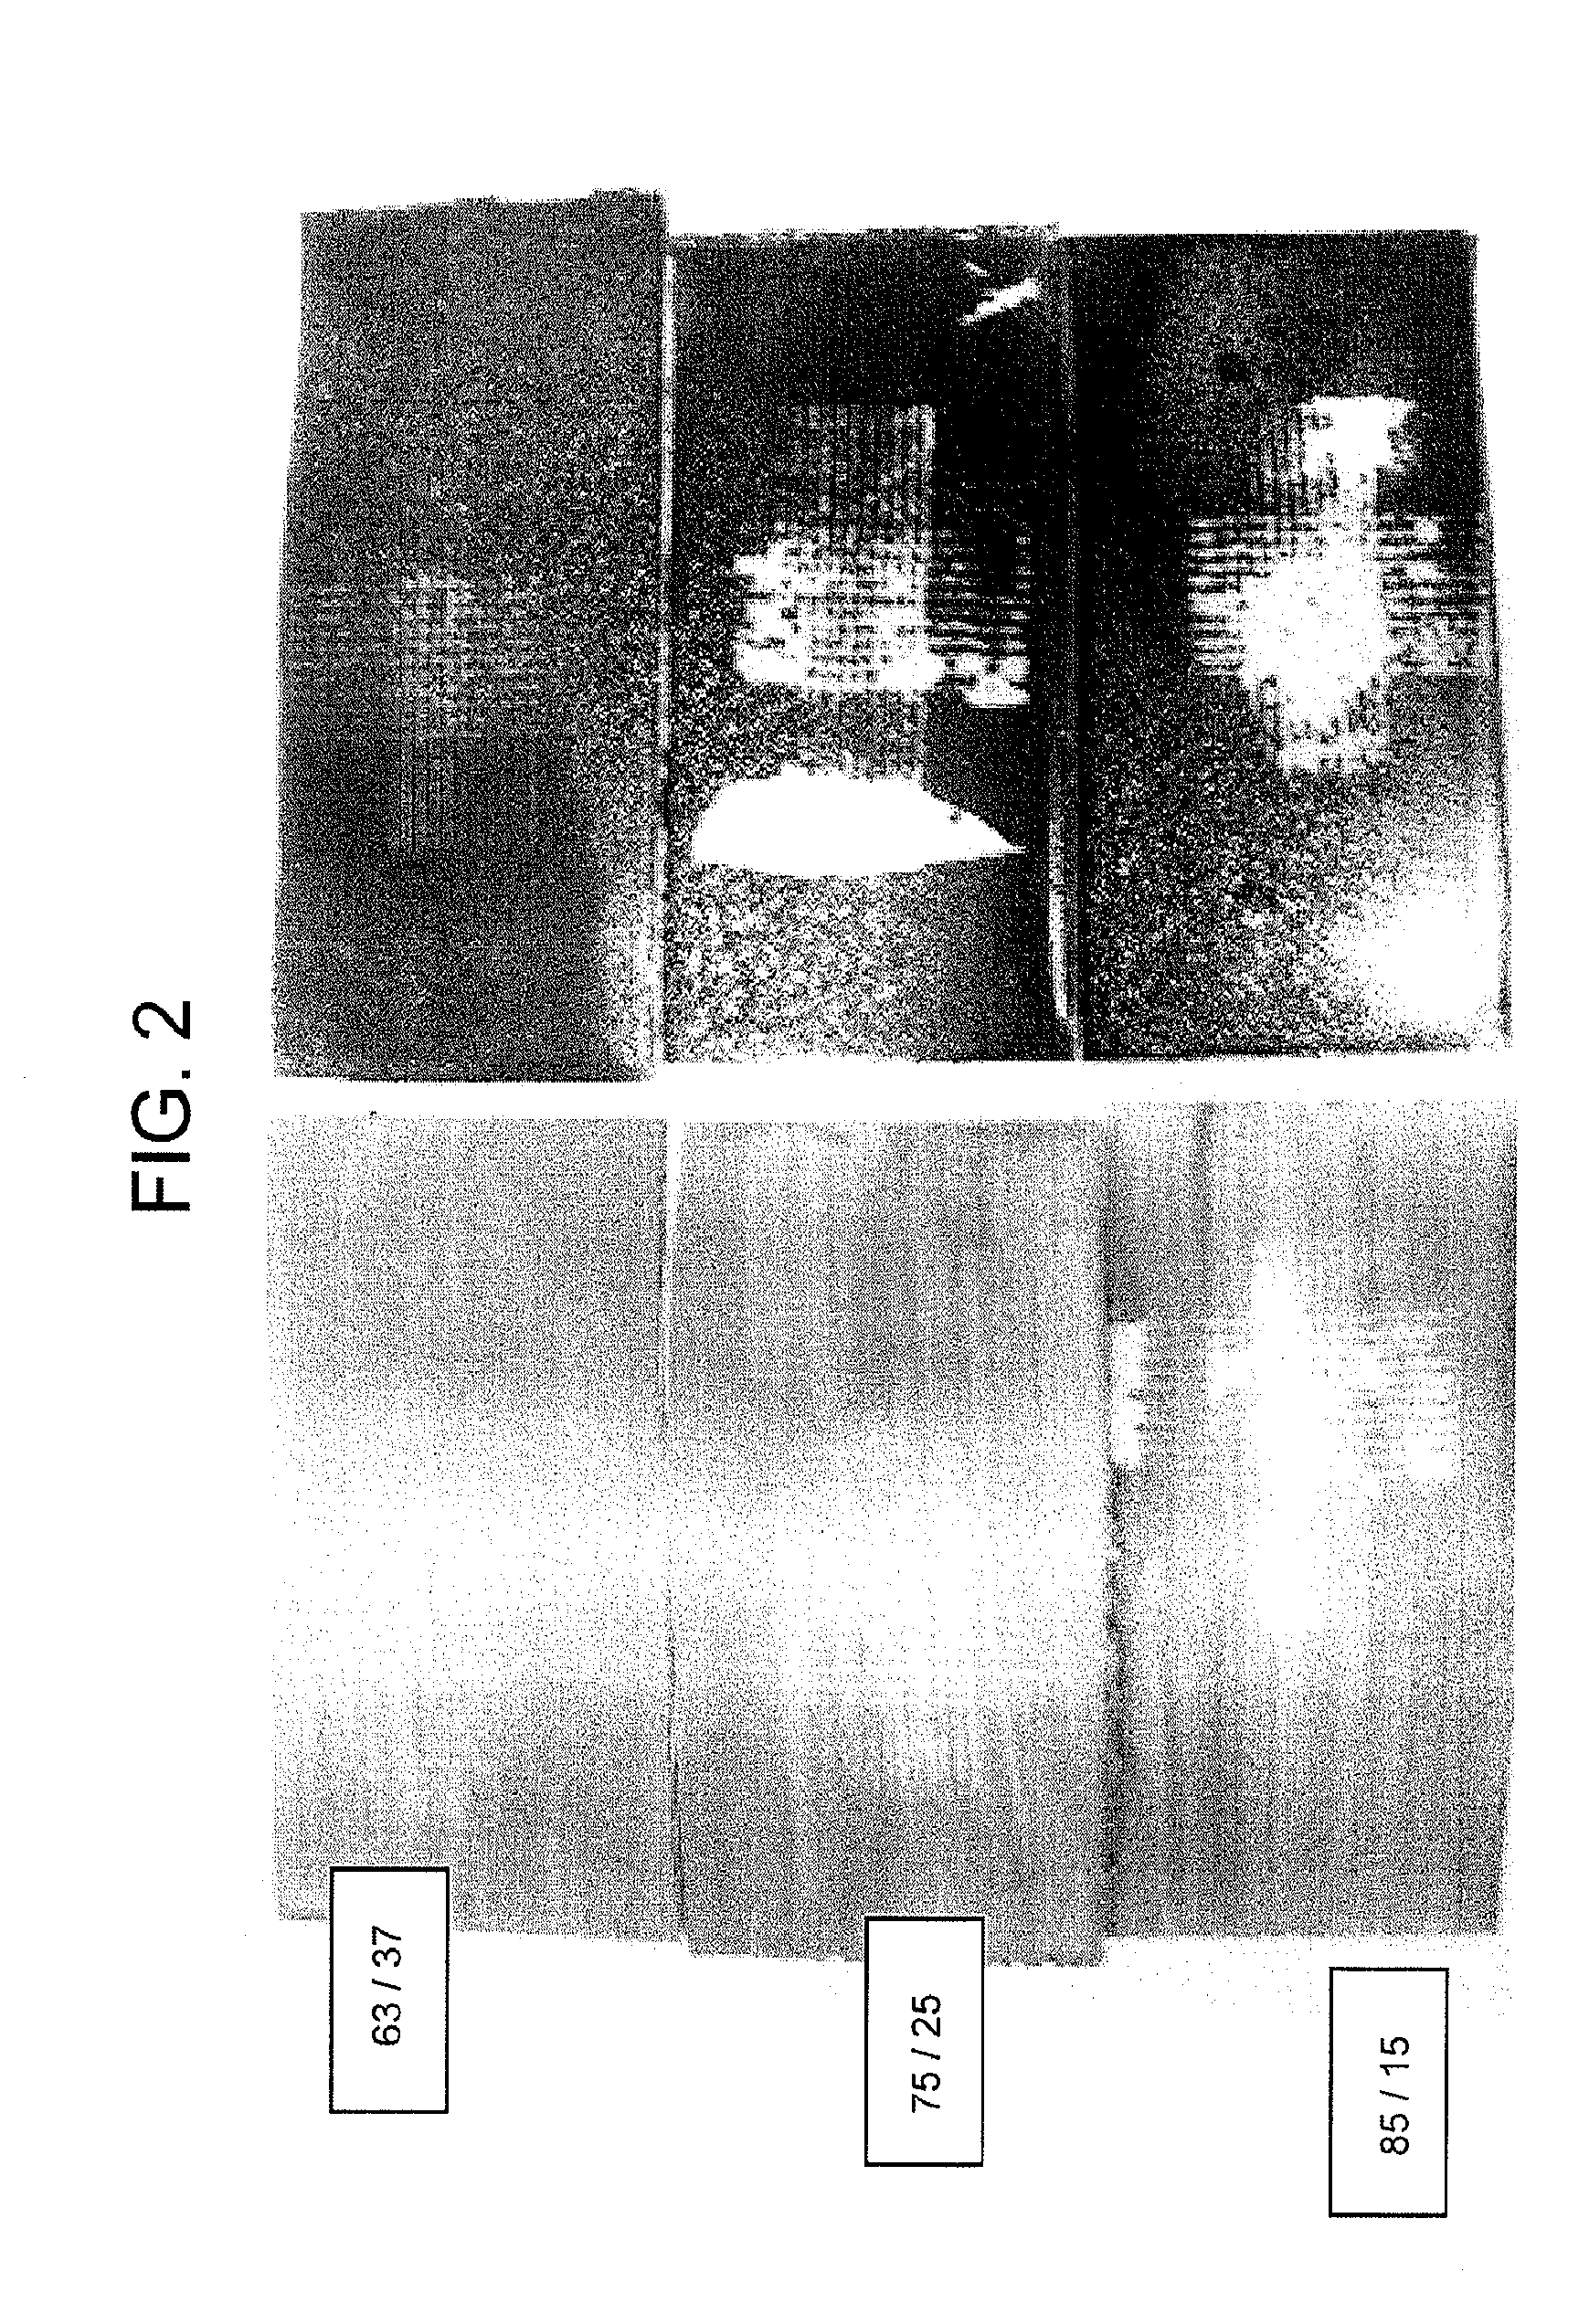 Articles Comprising Nonpolar Polyolefin and Polyurethane, and Methods for Their Preparation and Use